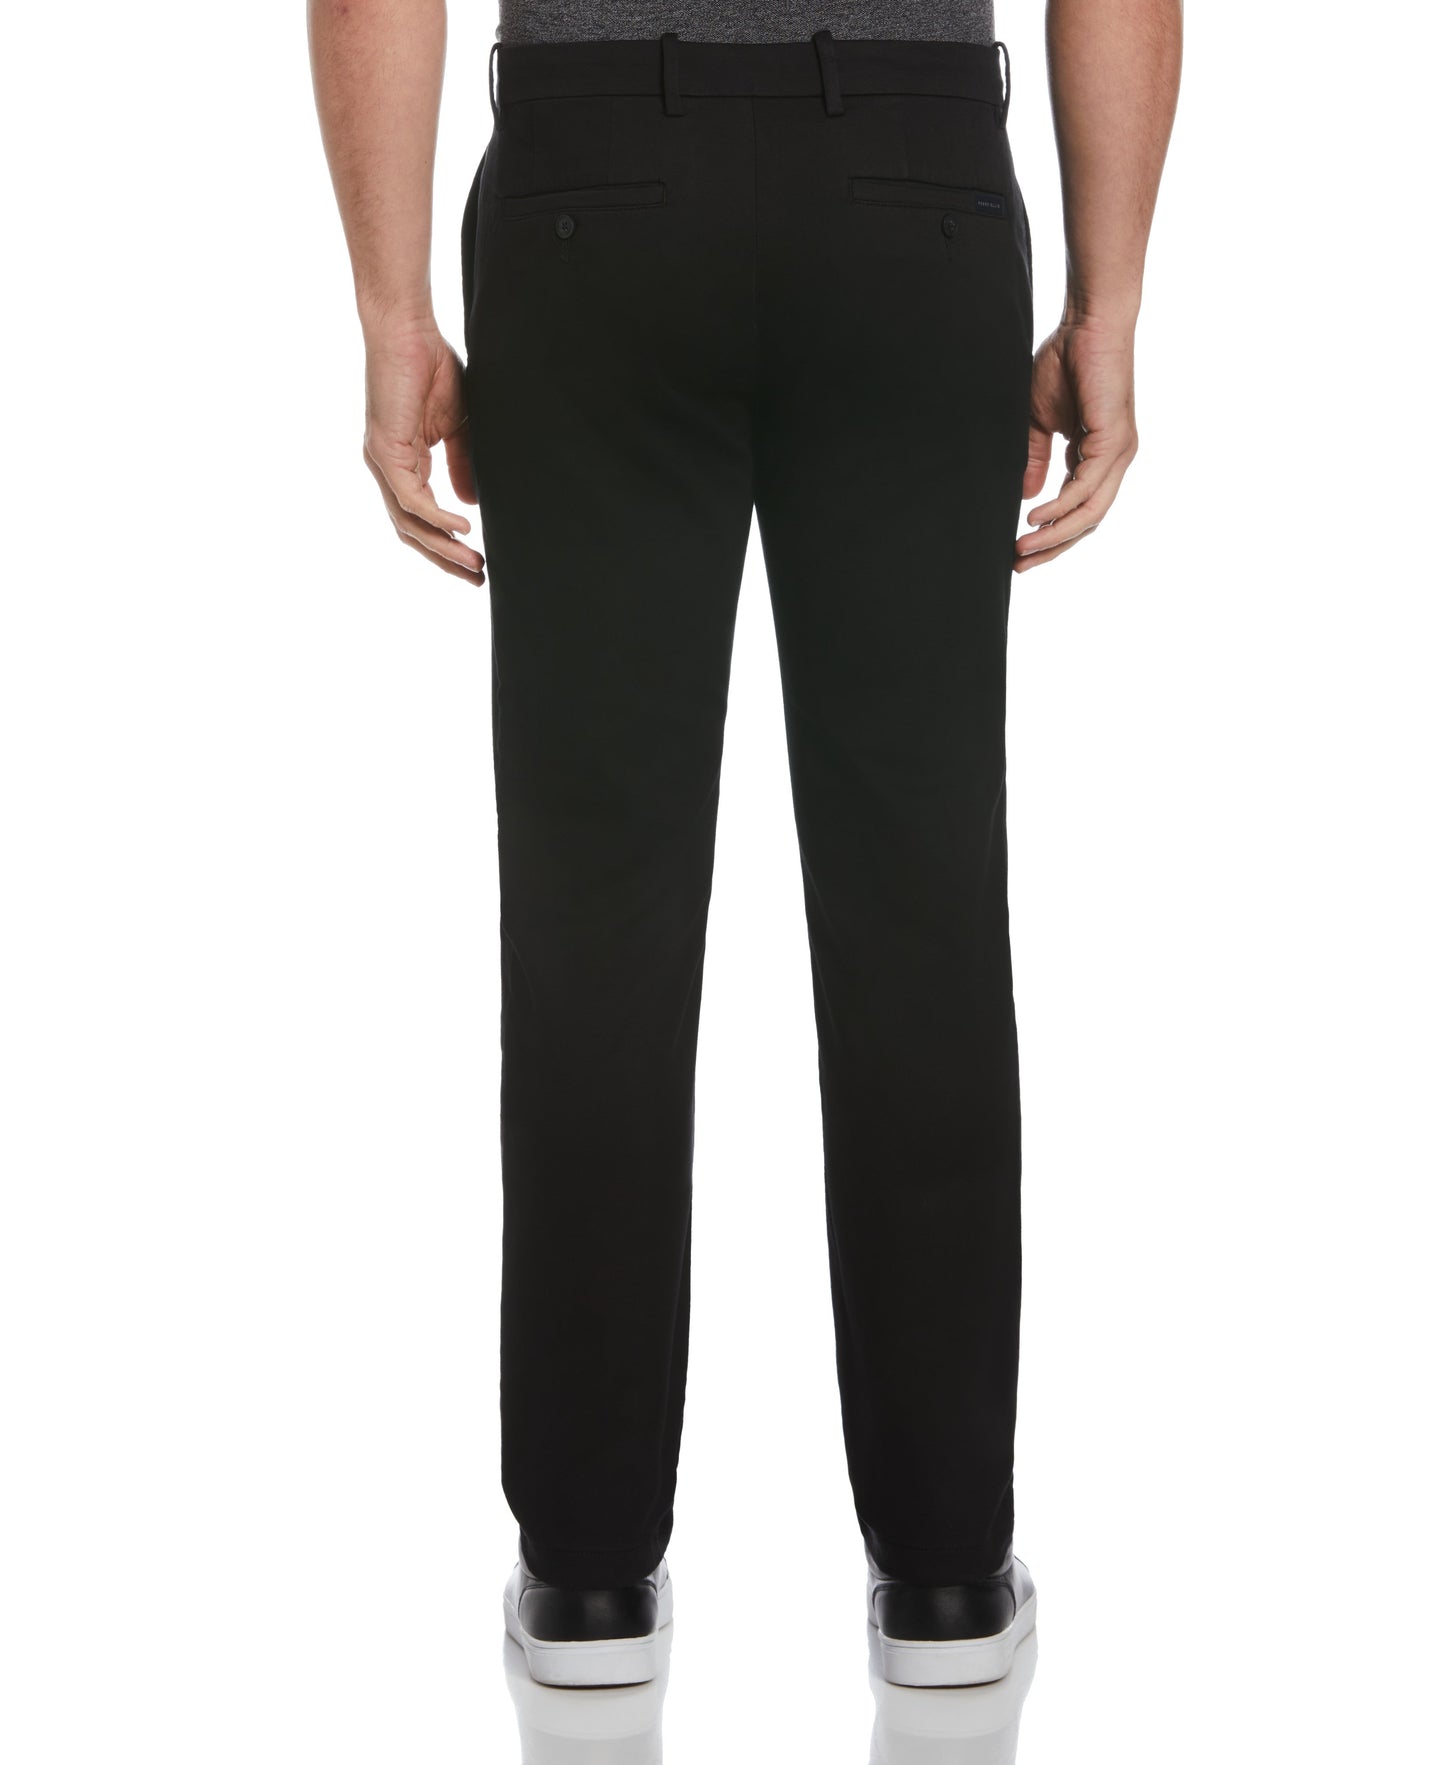 Tall Slim Fit Anywhere Stretch Chino Pant